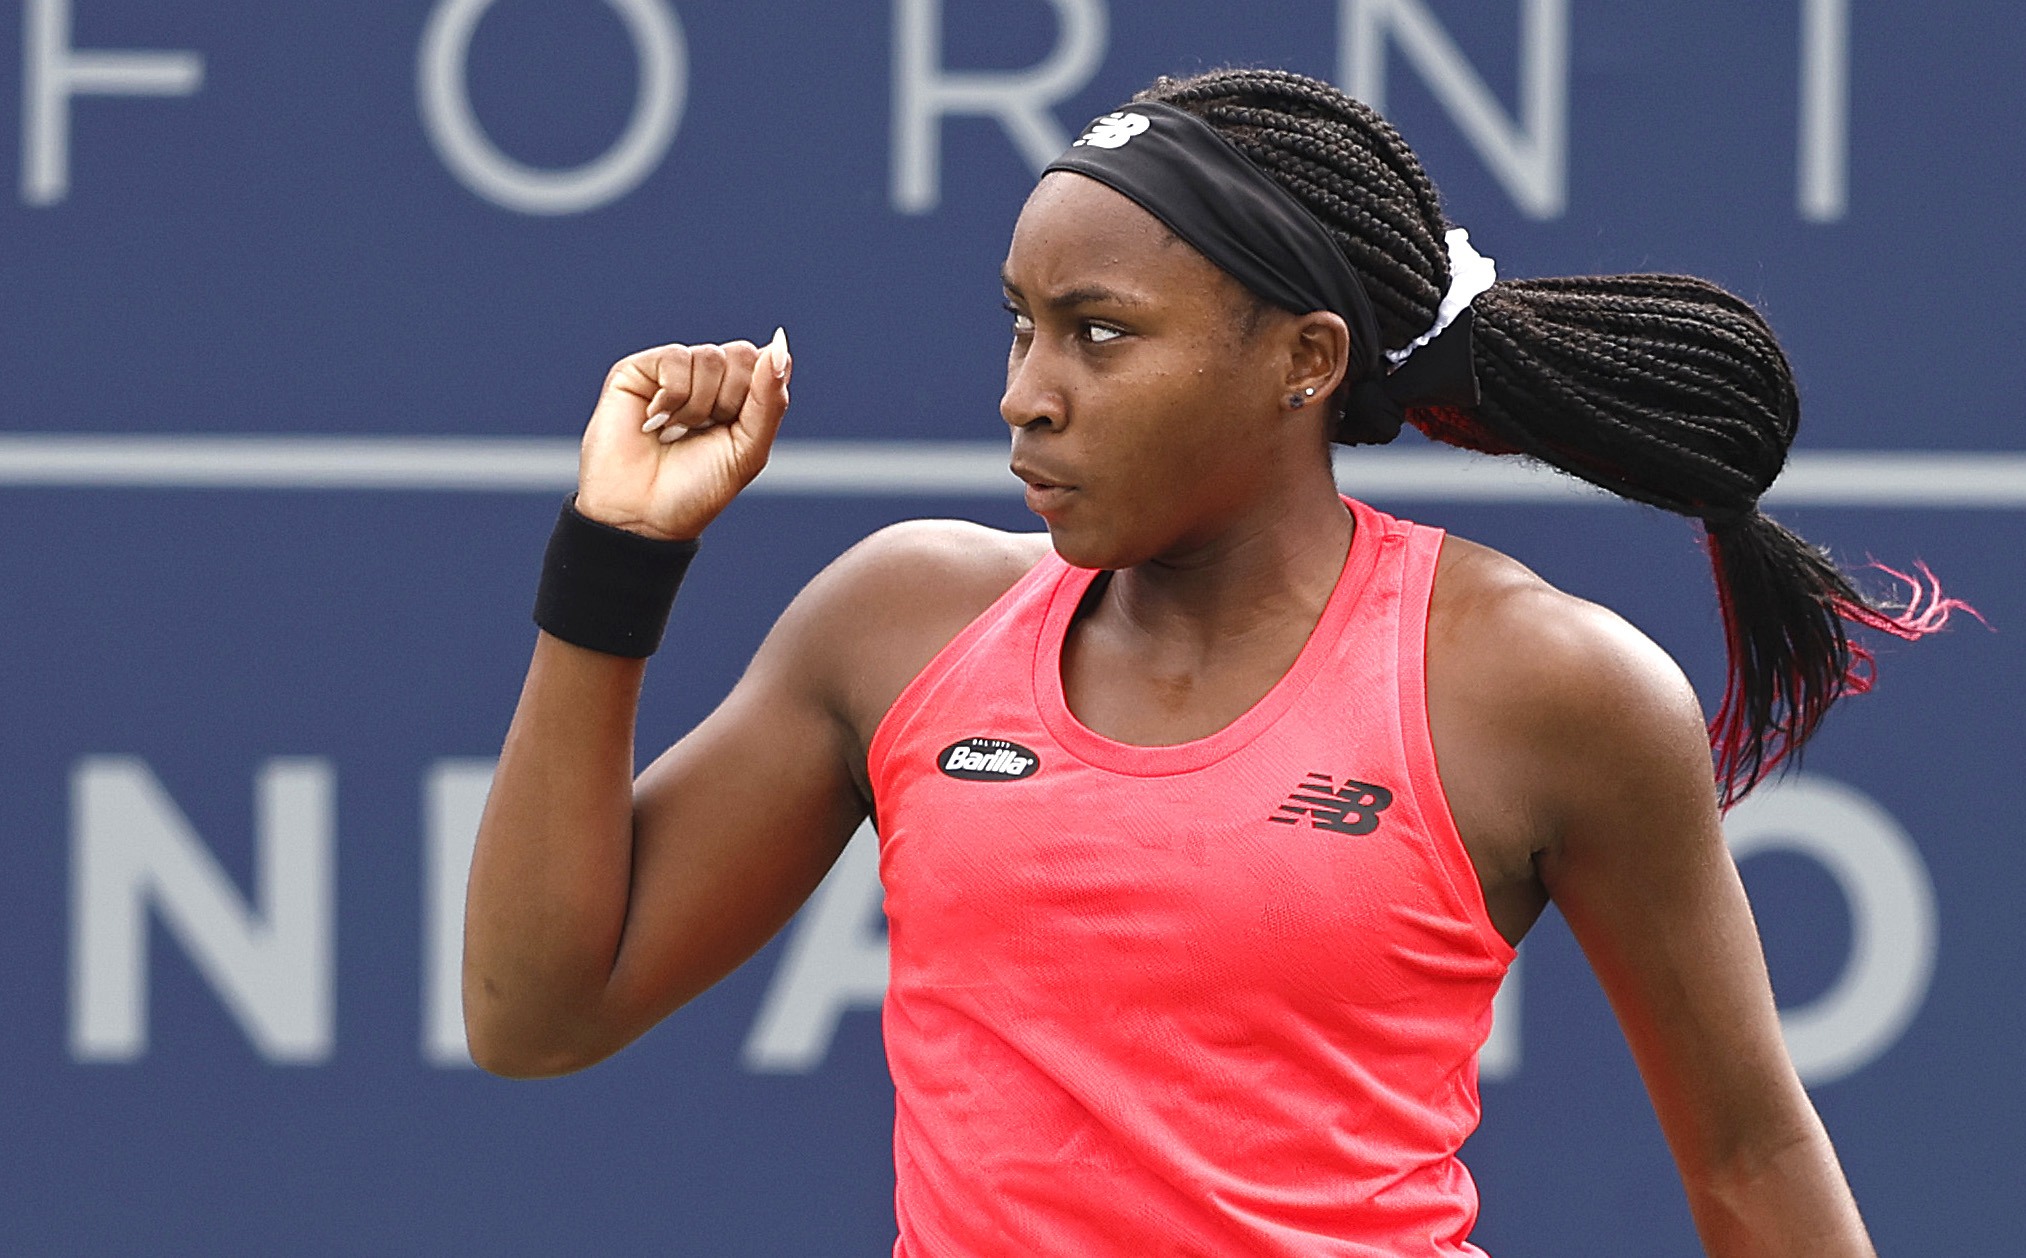 Ranking Reaction Coco Gauff sets new careerhigh of No. 7, Donna Vekic